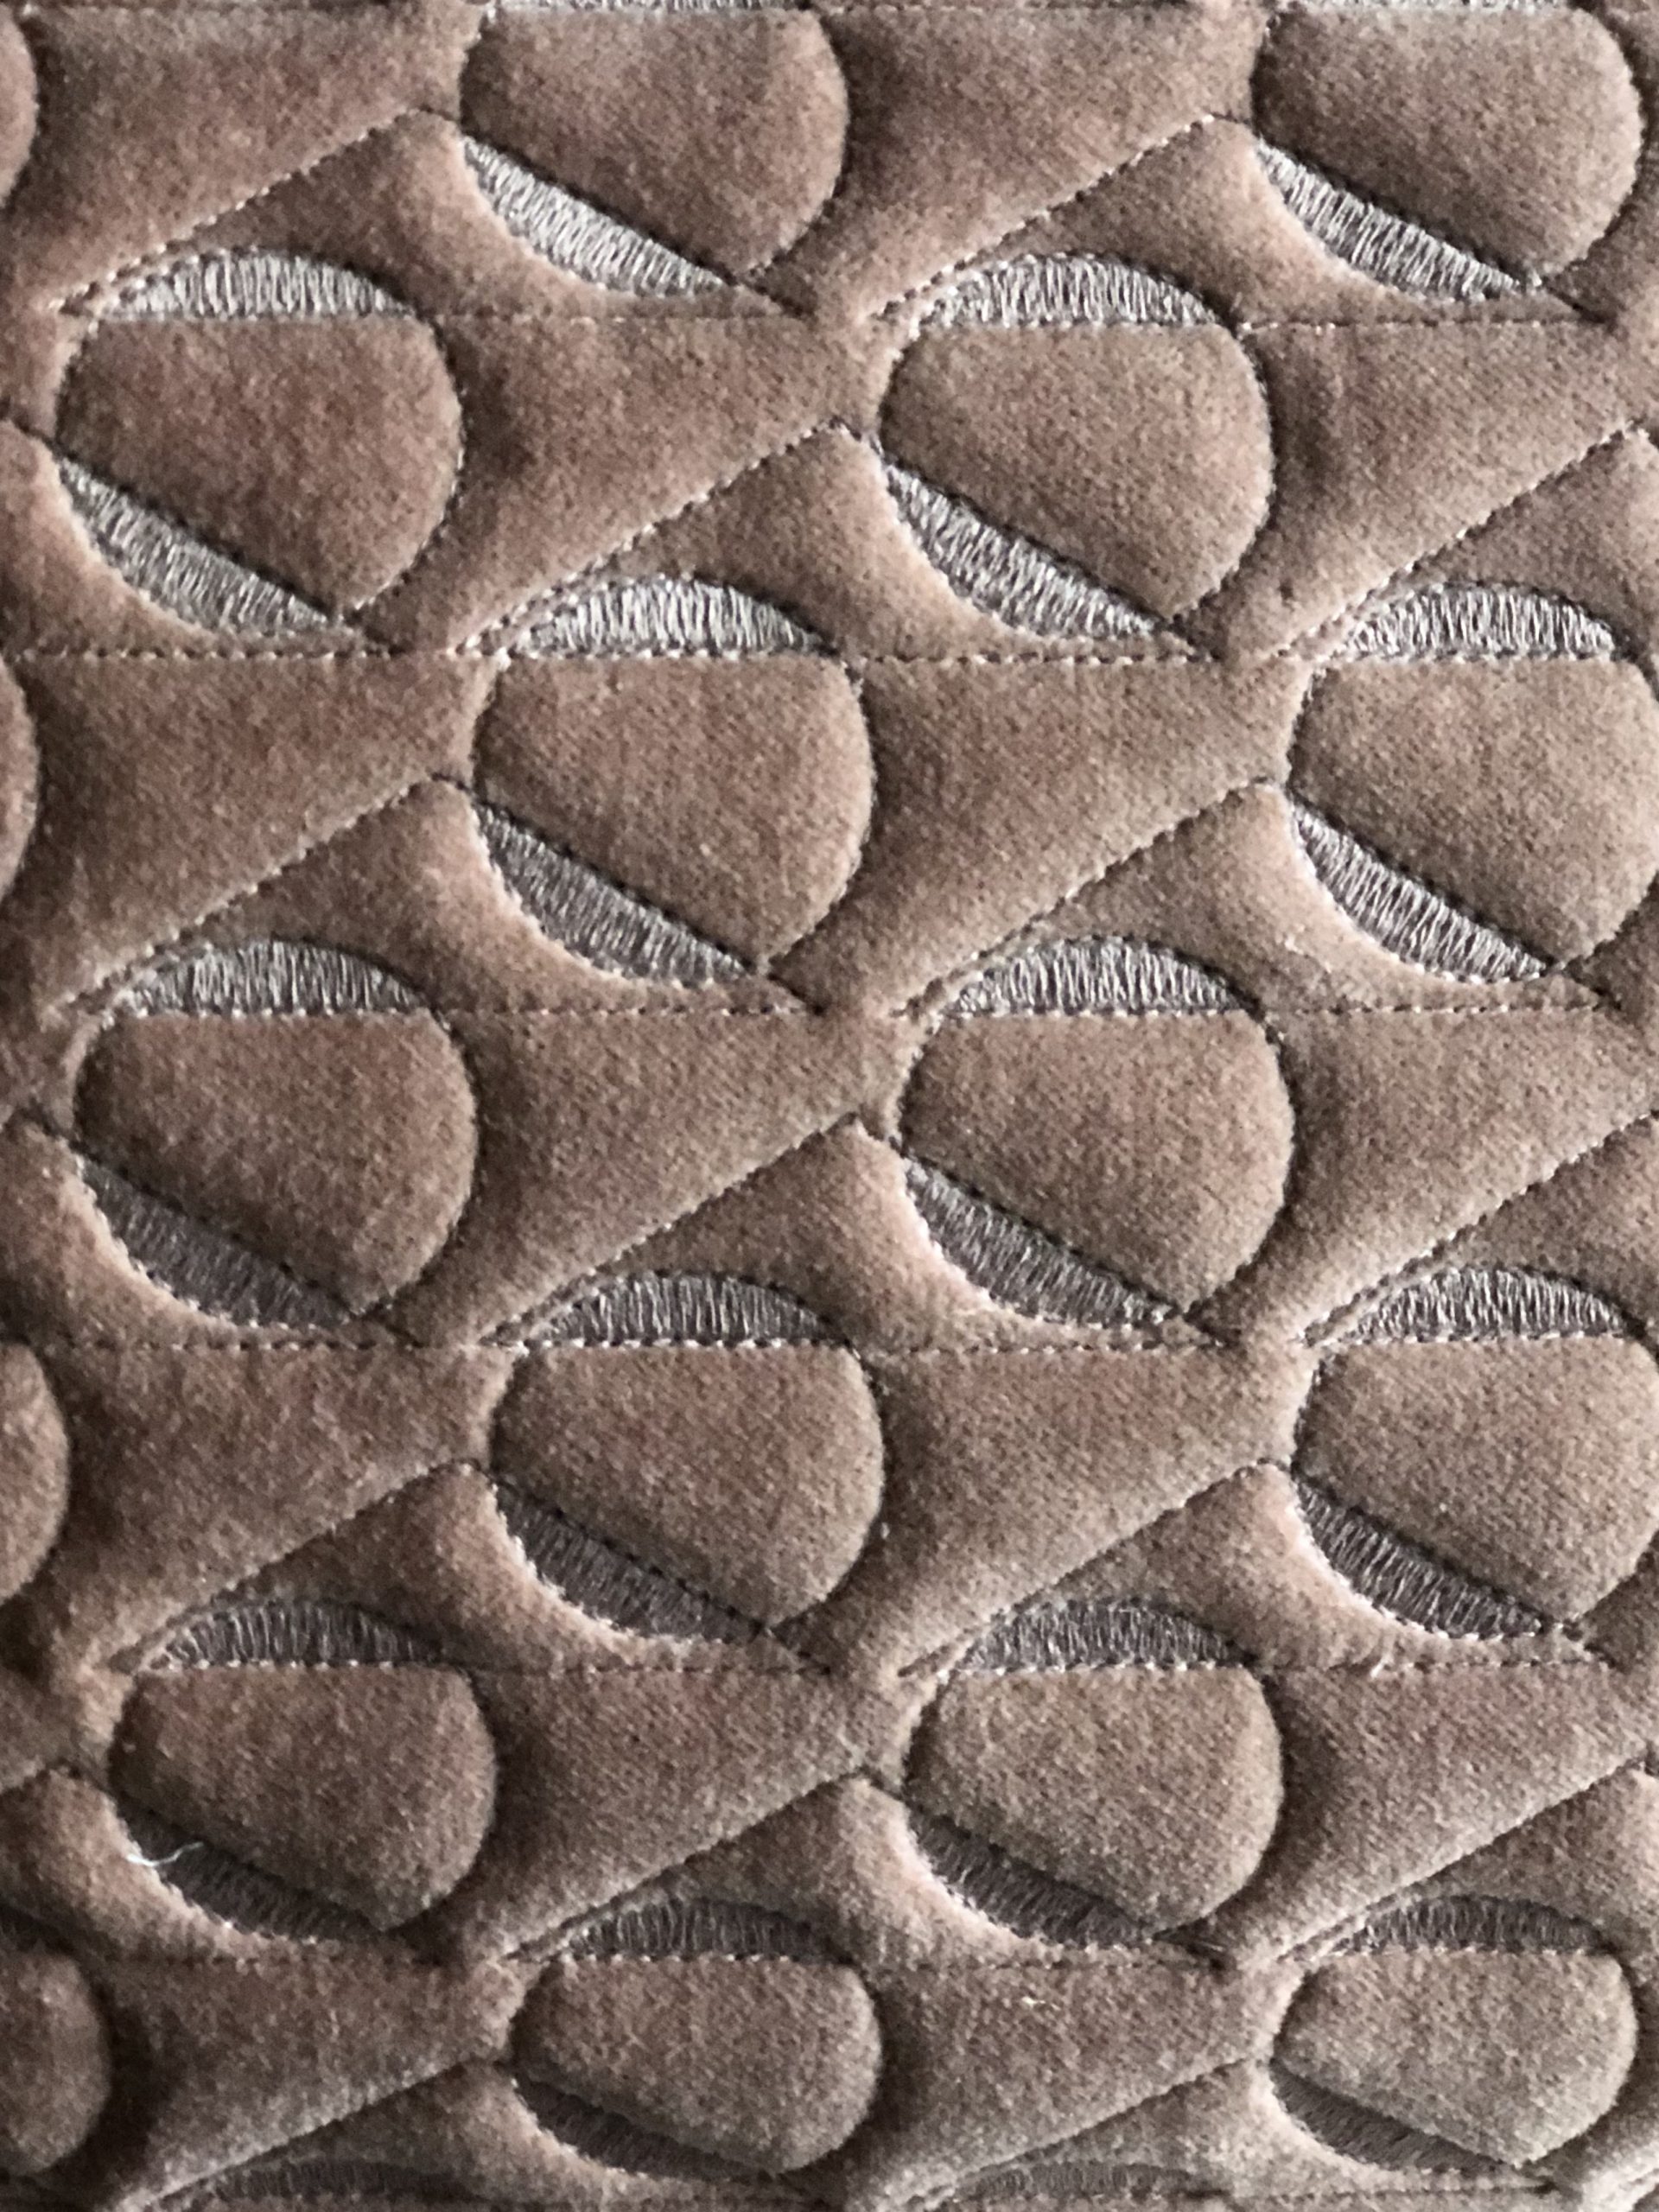 Tight details of dusky pink velvet with stitched geometric design.